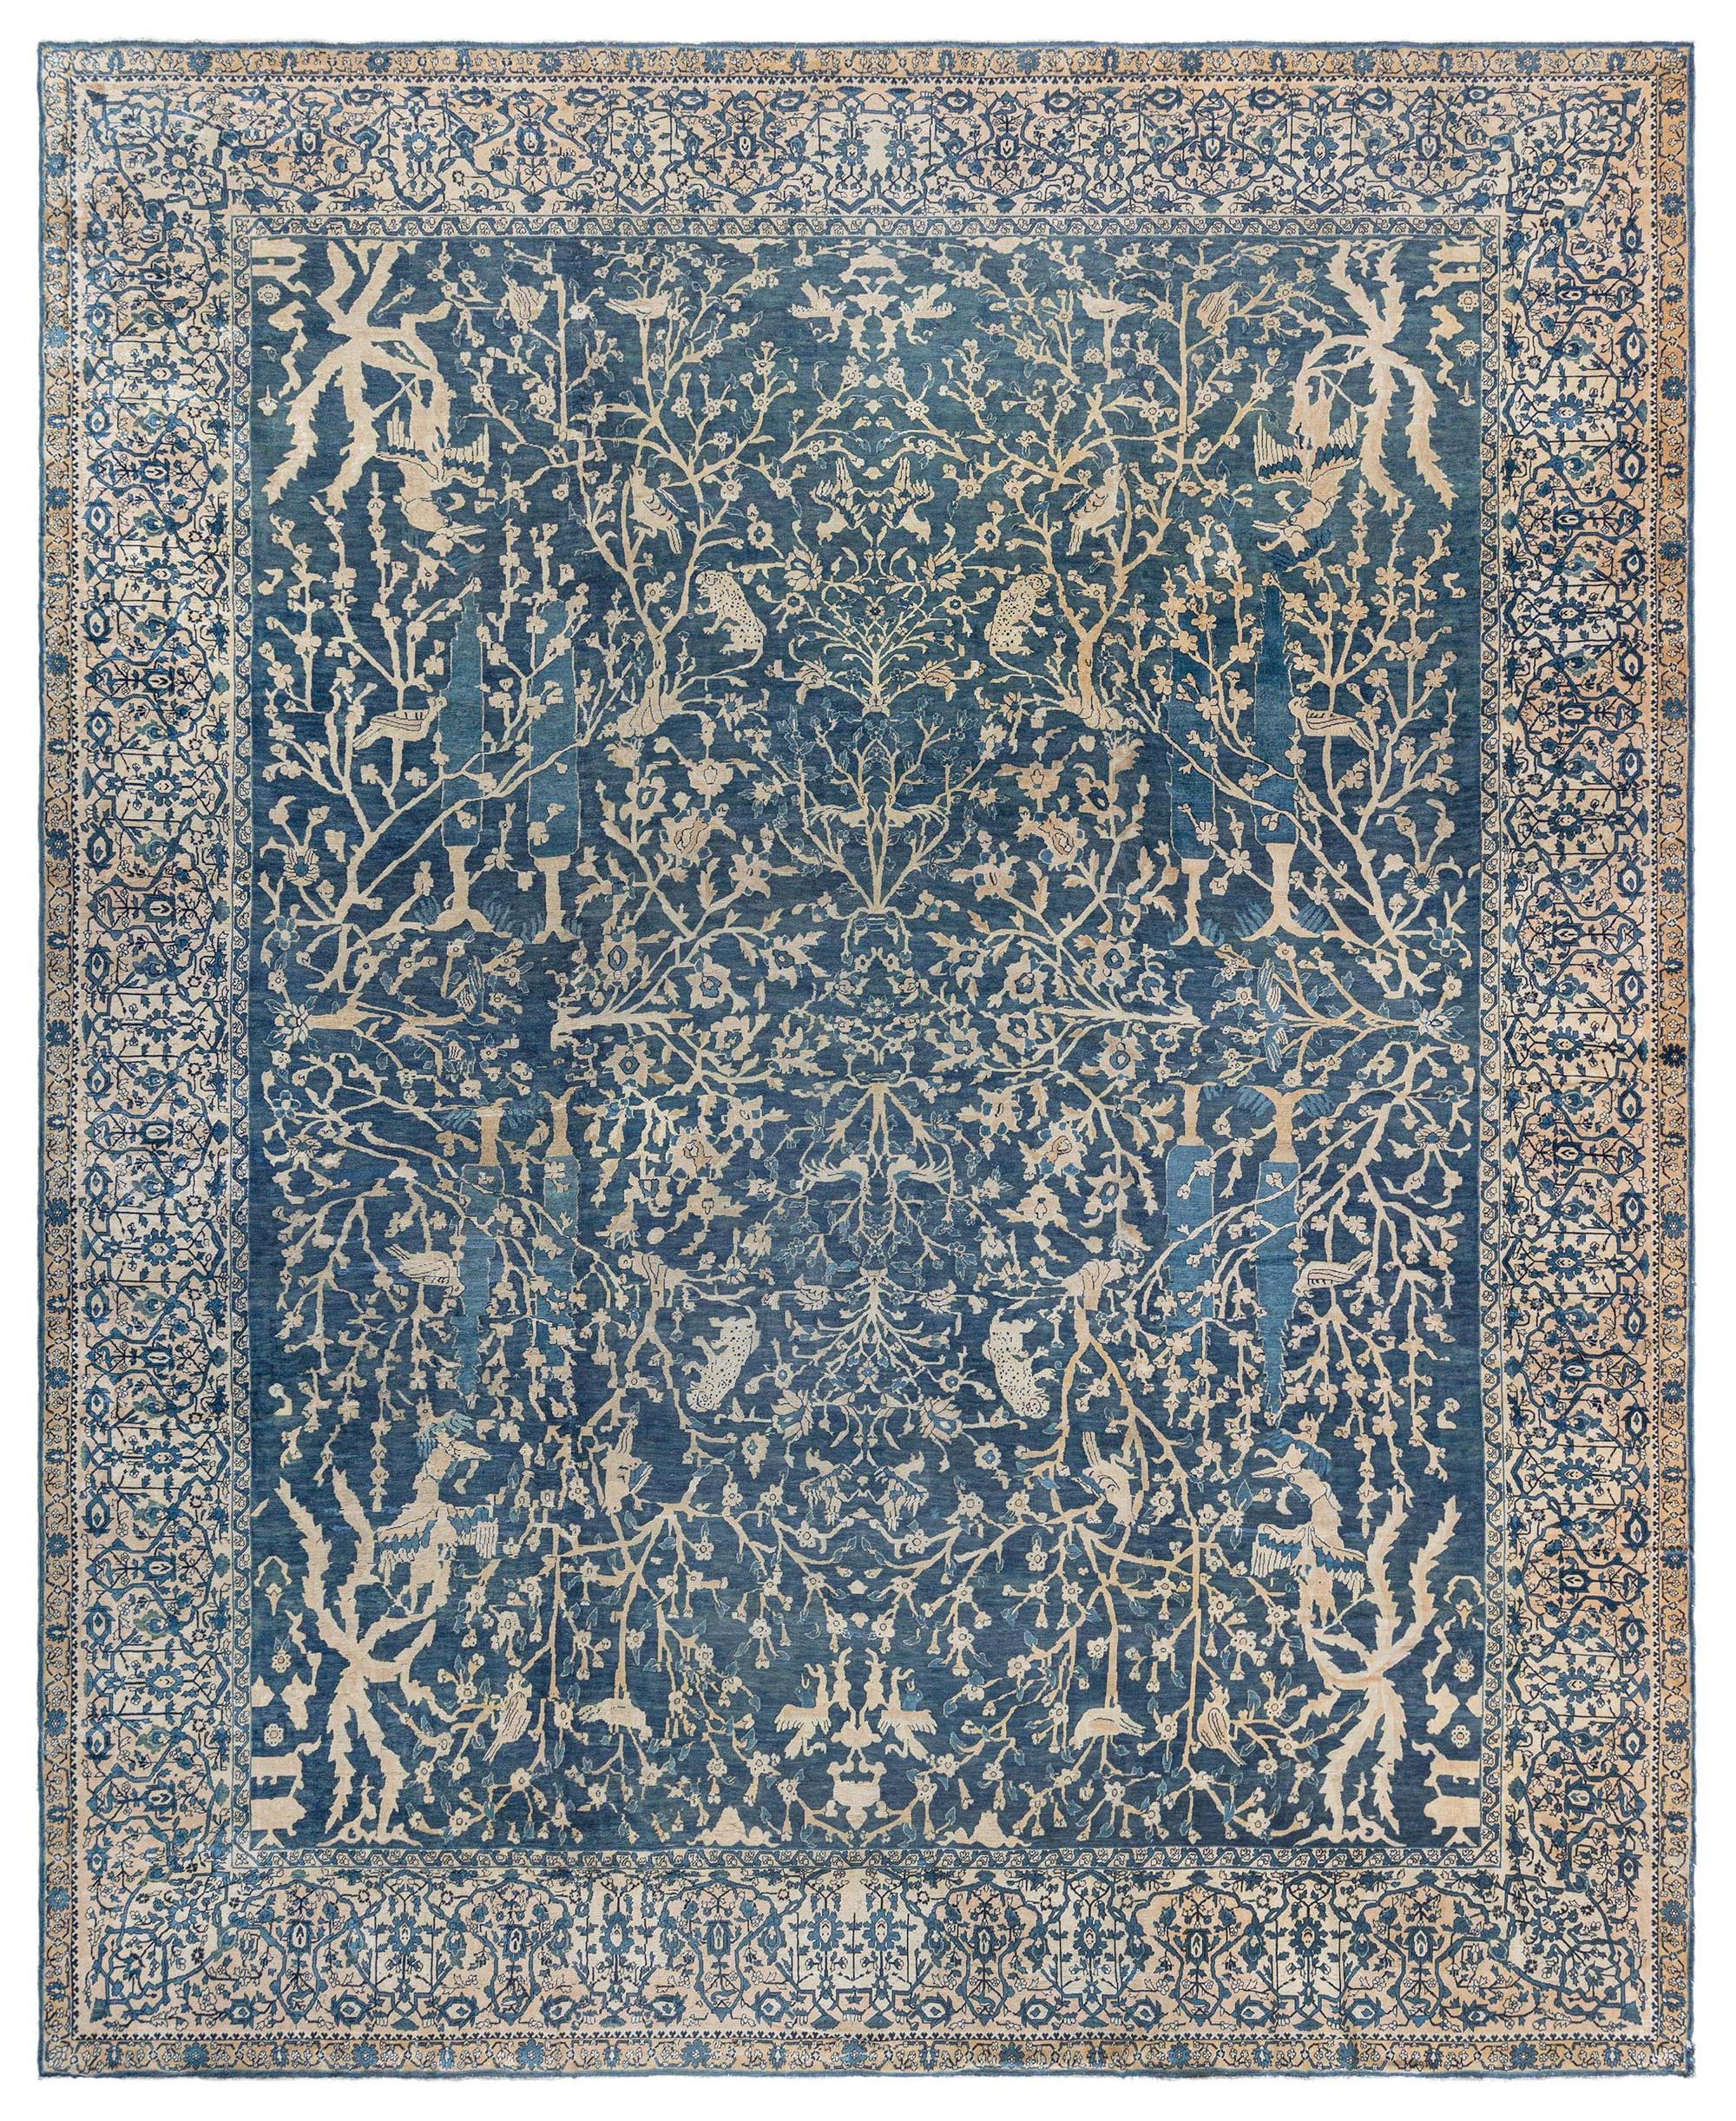 Antique Indian Blue Handmade Wool Rug For Sale